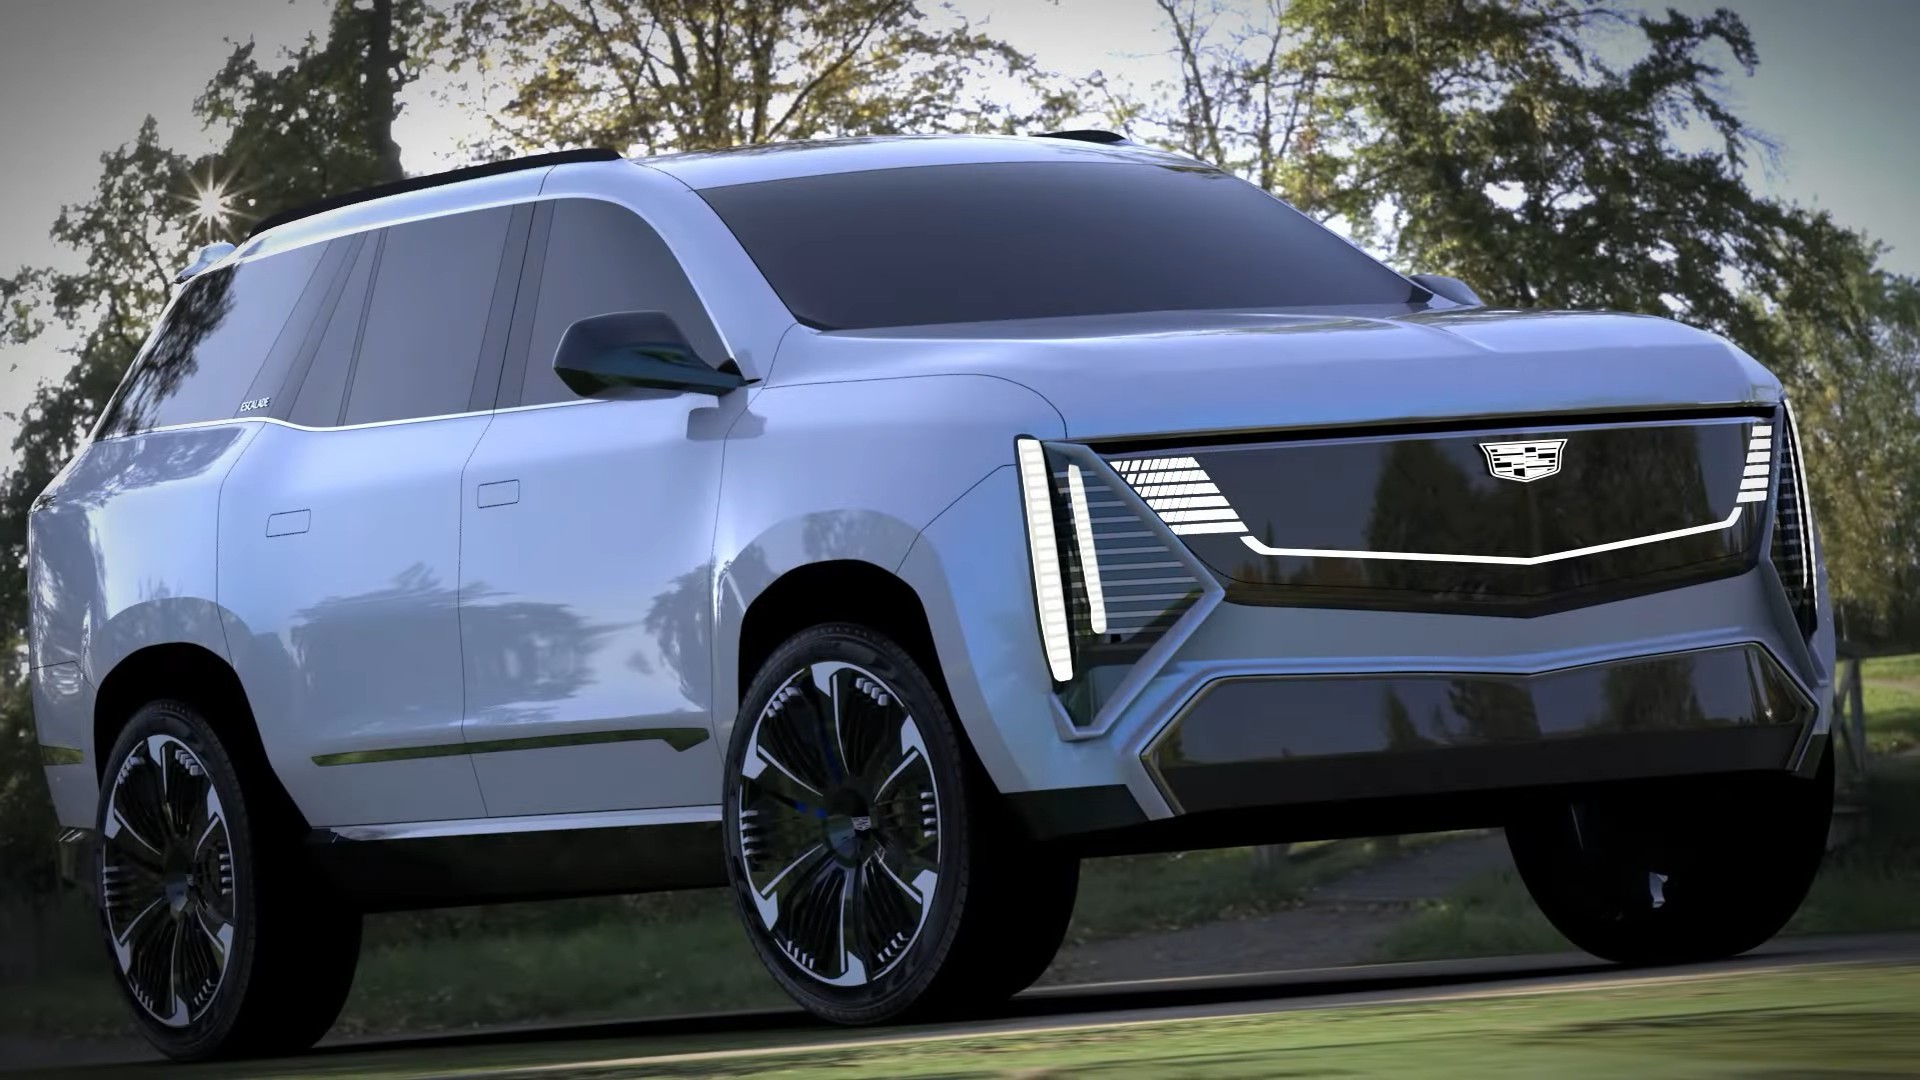 2024 Cadillac Escalade IQ Imagined With New Design Language and Dark or